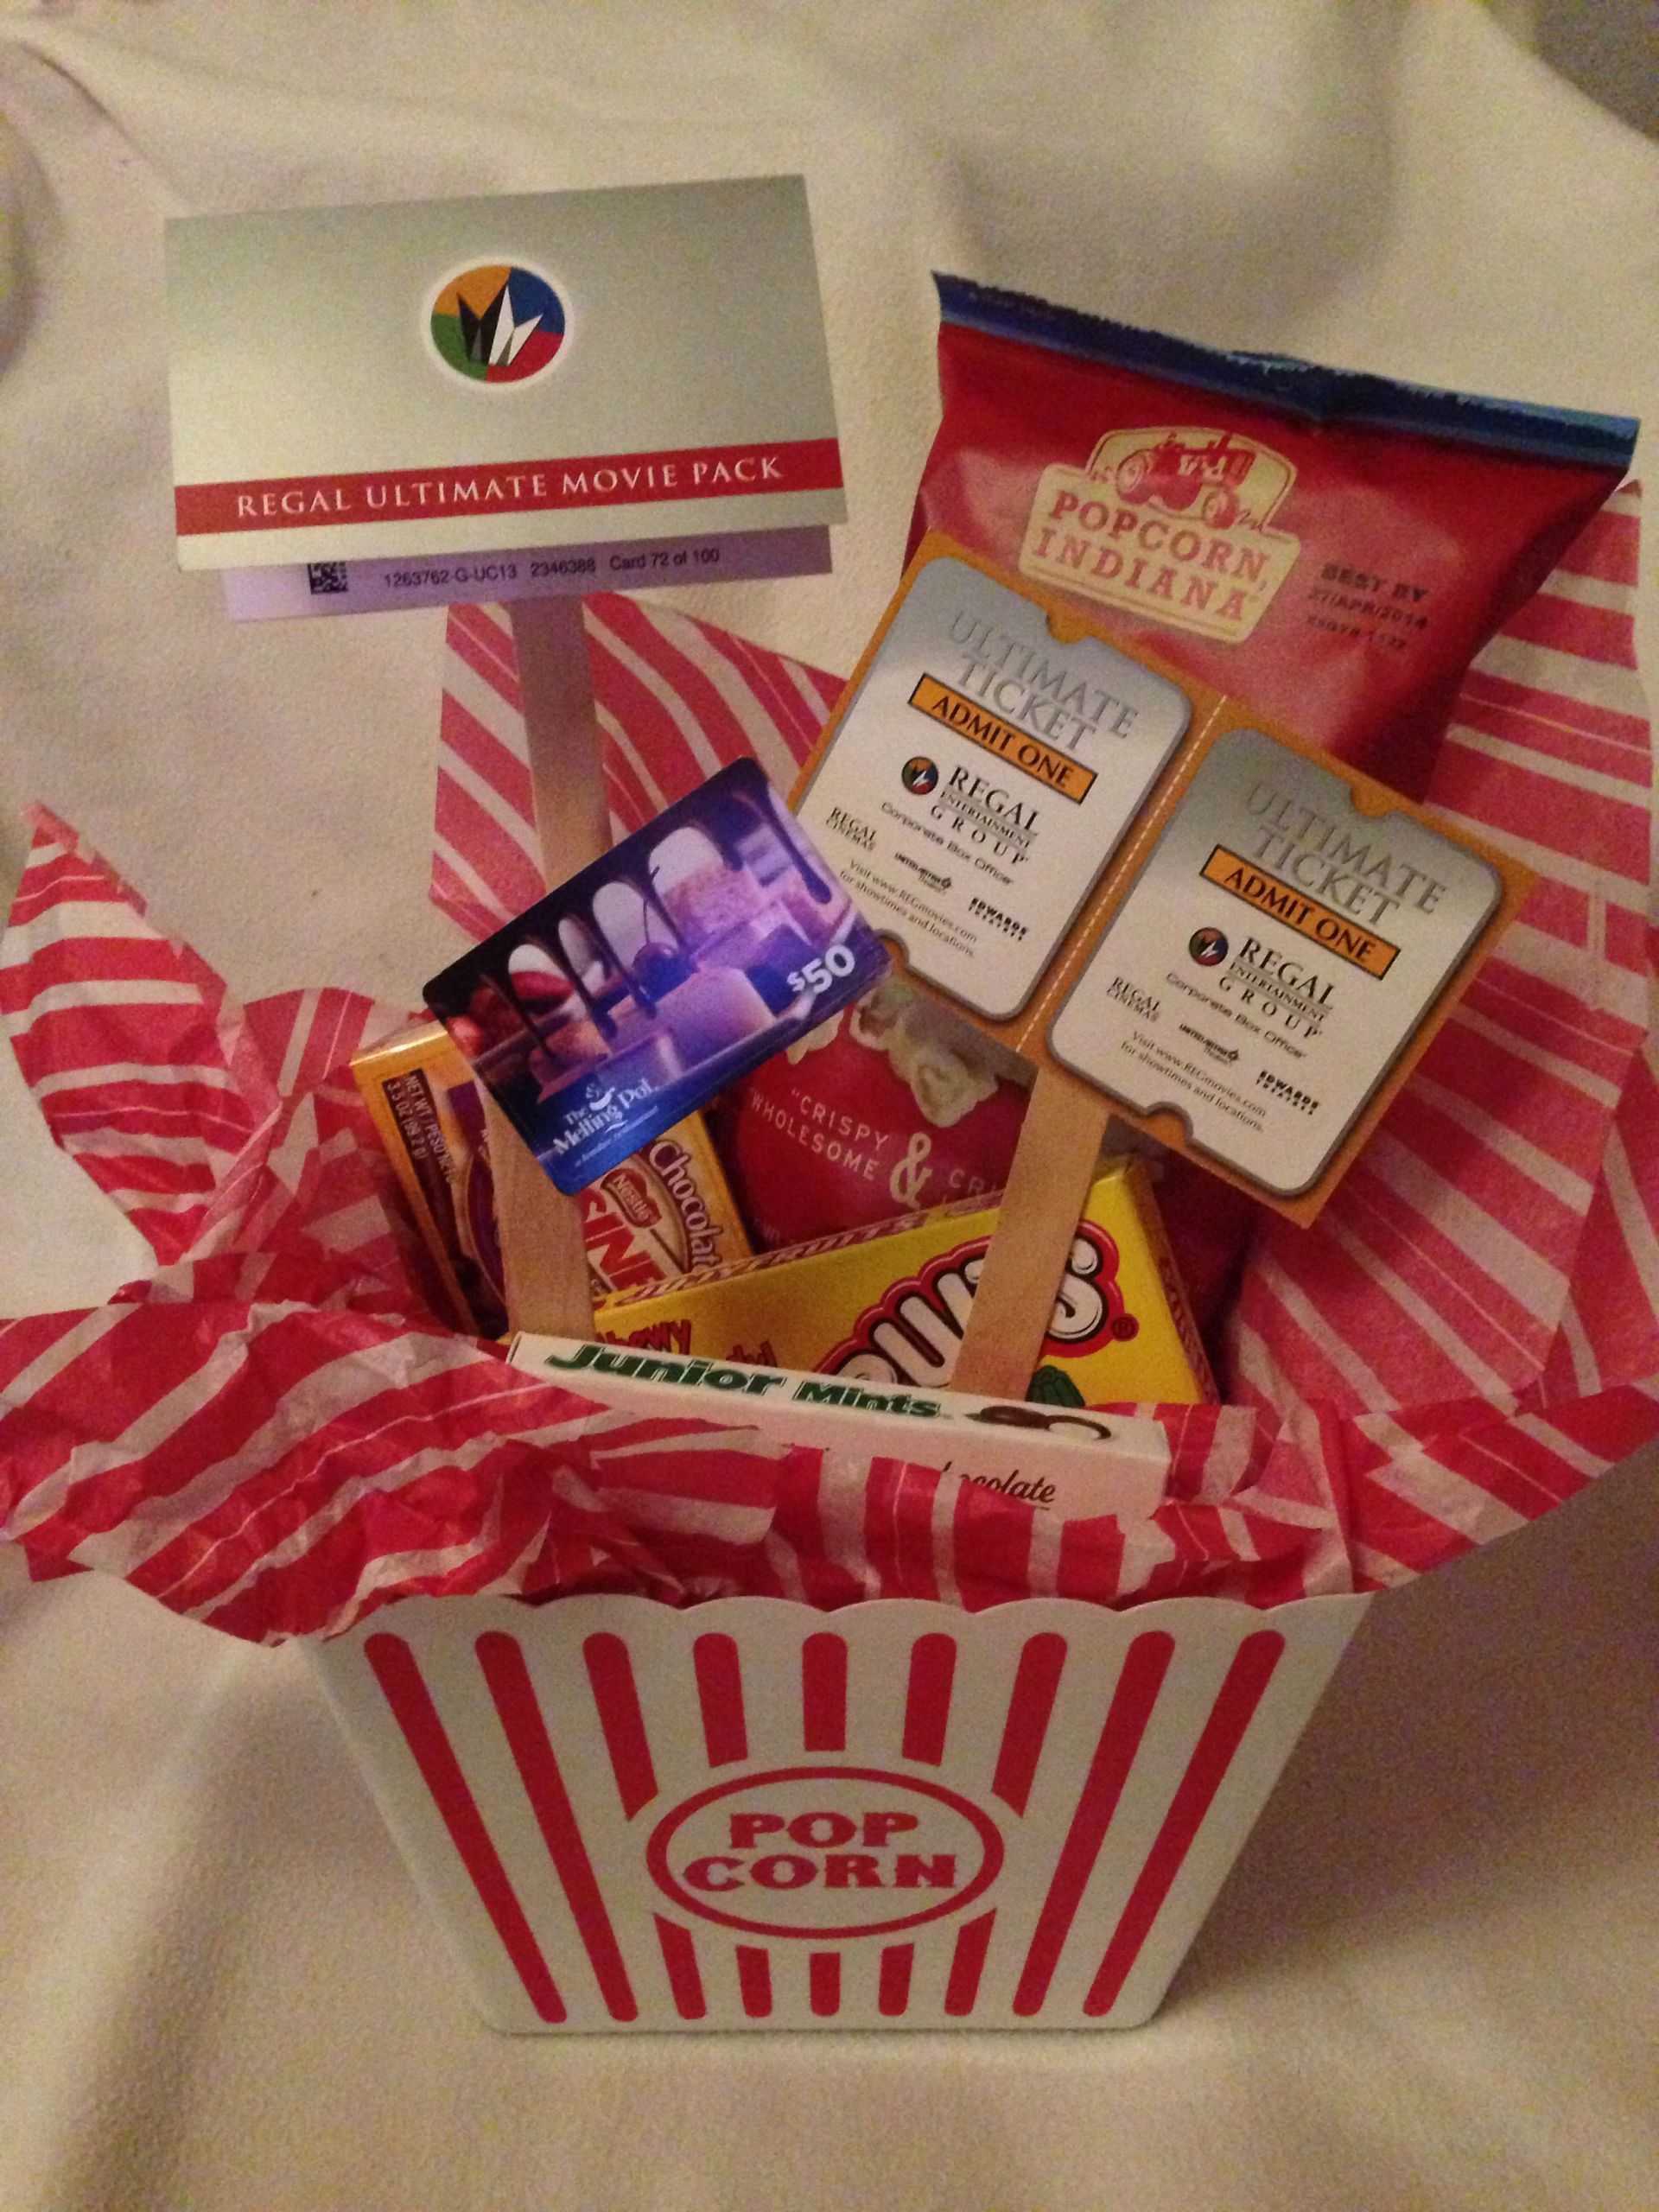 Movie Theater Gift Basket Ideas
 Dinner & a movie Gift Movie theater snacks bag of